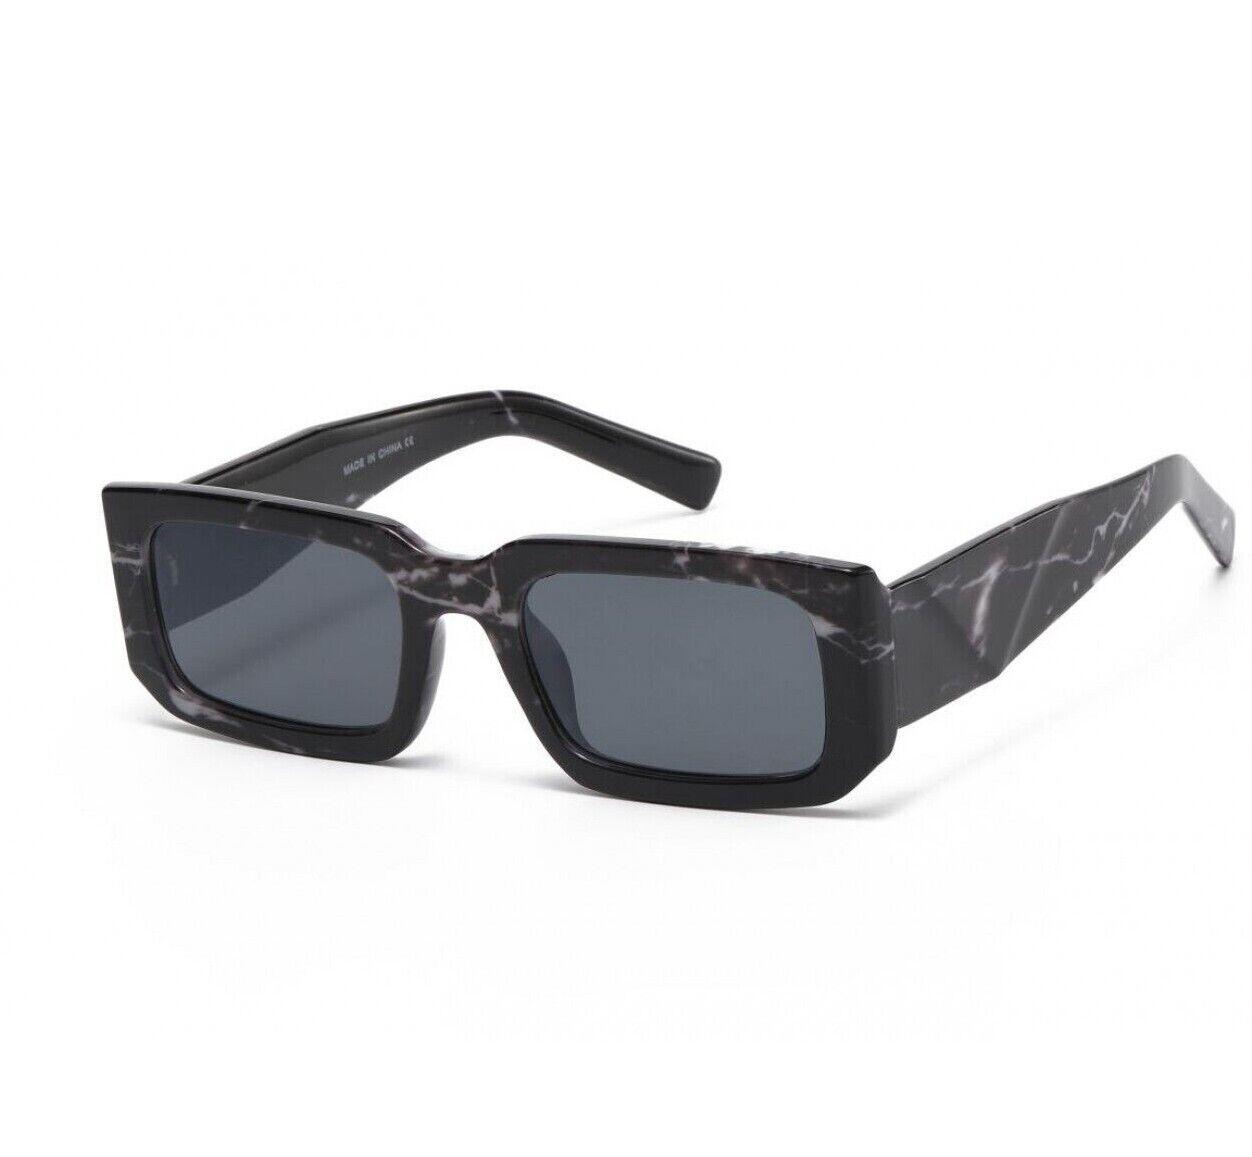 Moda Sunglasses - Assorted Shades, Sizes and Frames